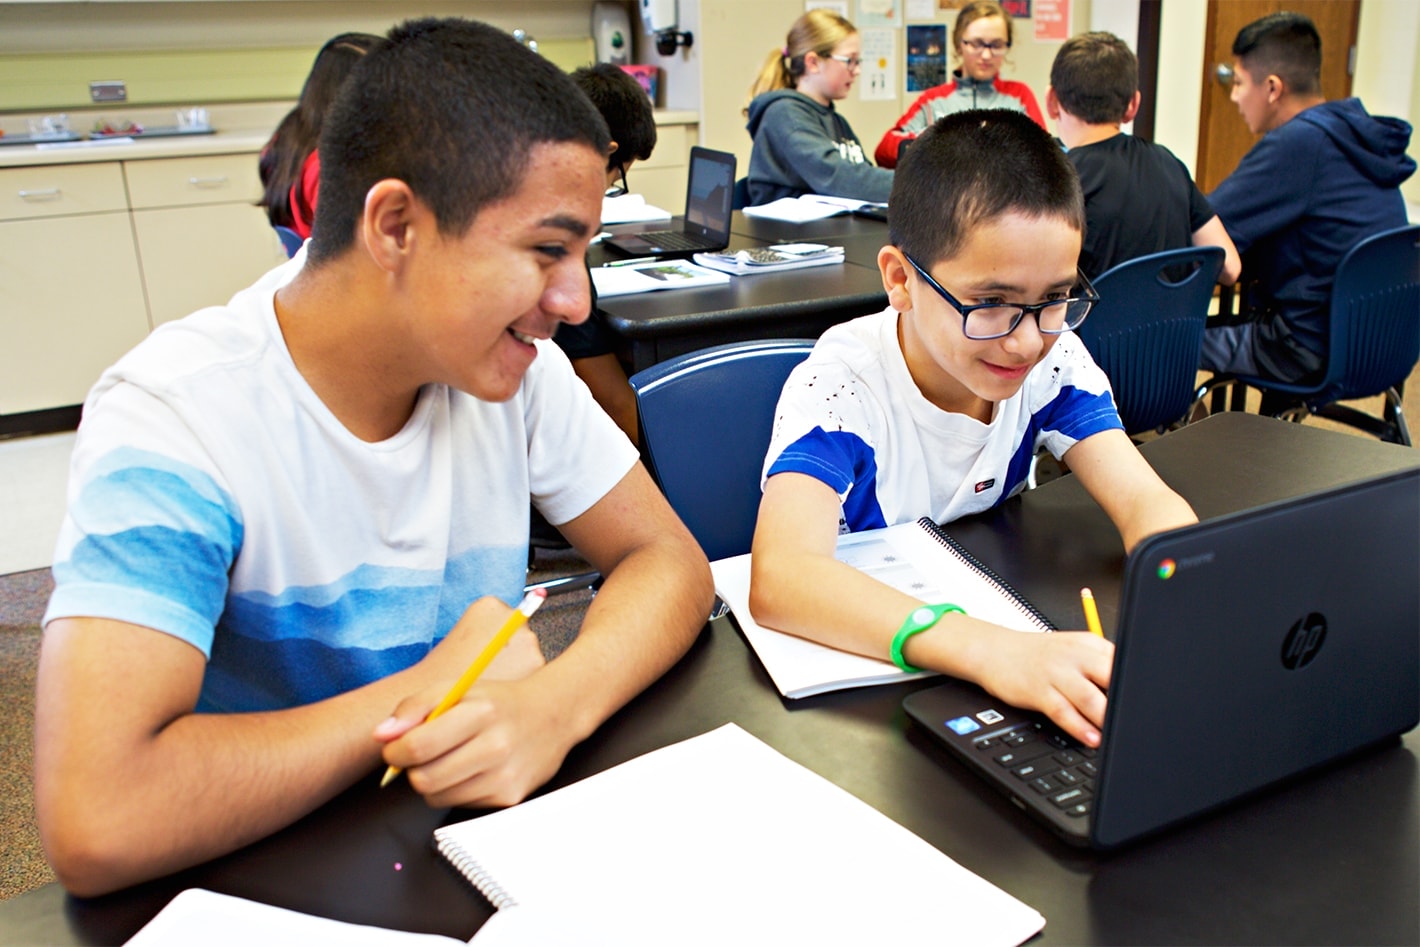 Two students, one using a laptop and the other writing in a notebook, smiling and working together in a classroom.